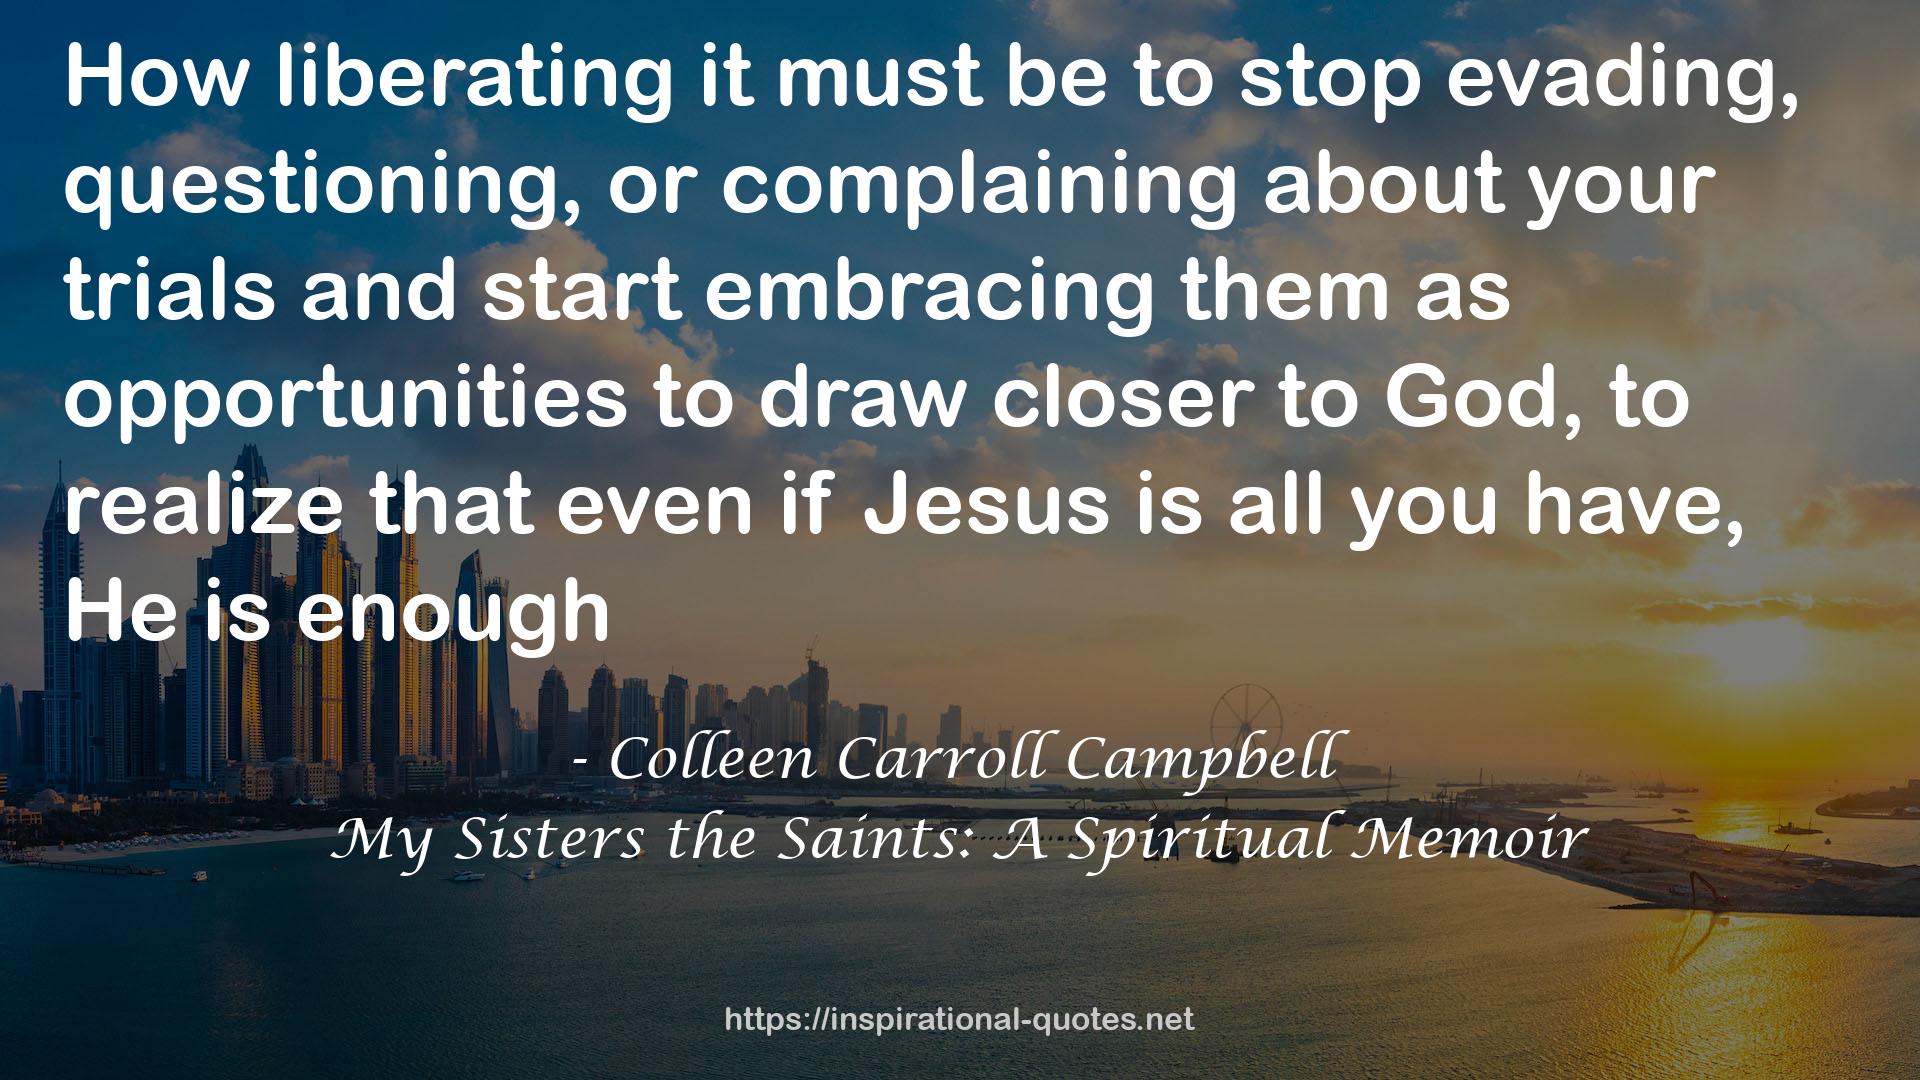 Colleen Carroll Campbell QUOTES